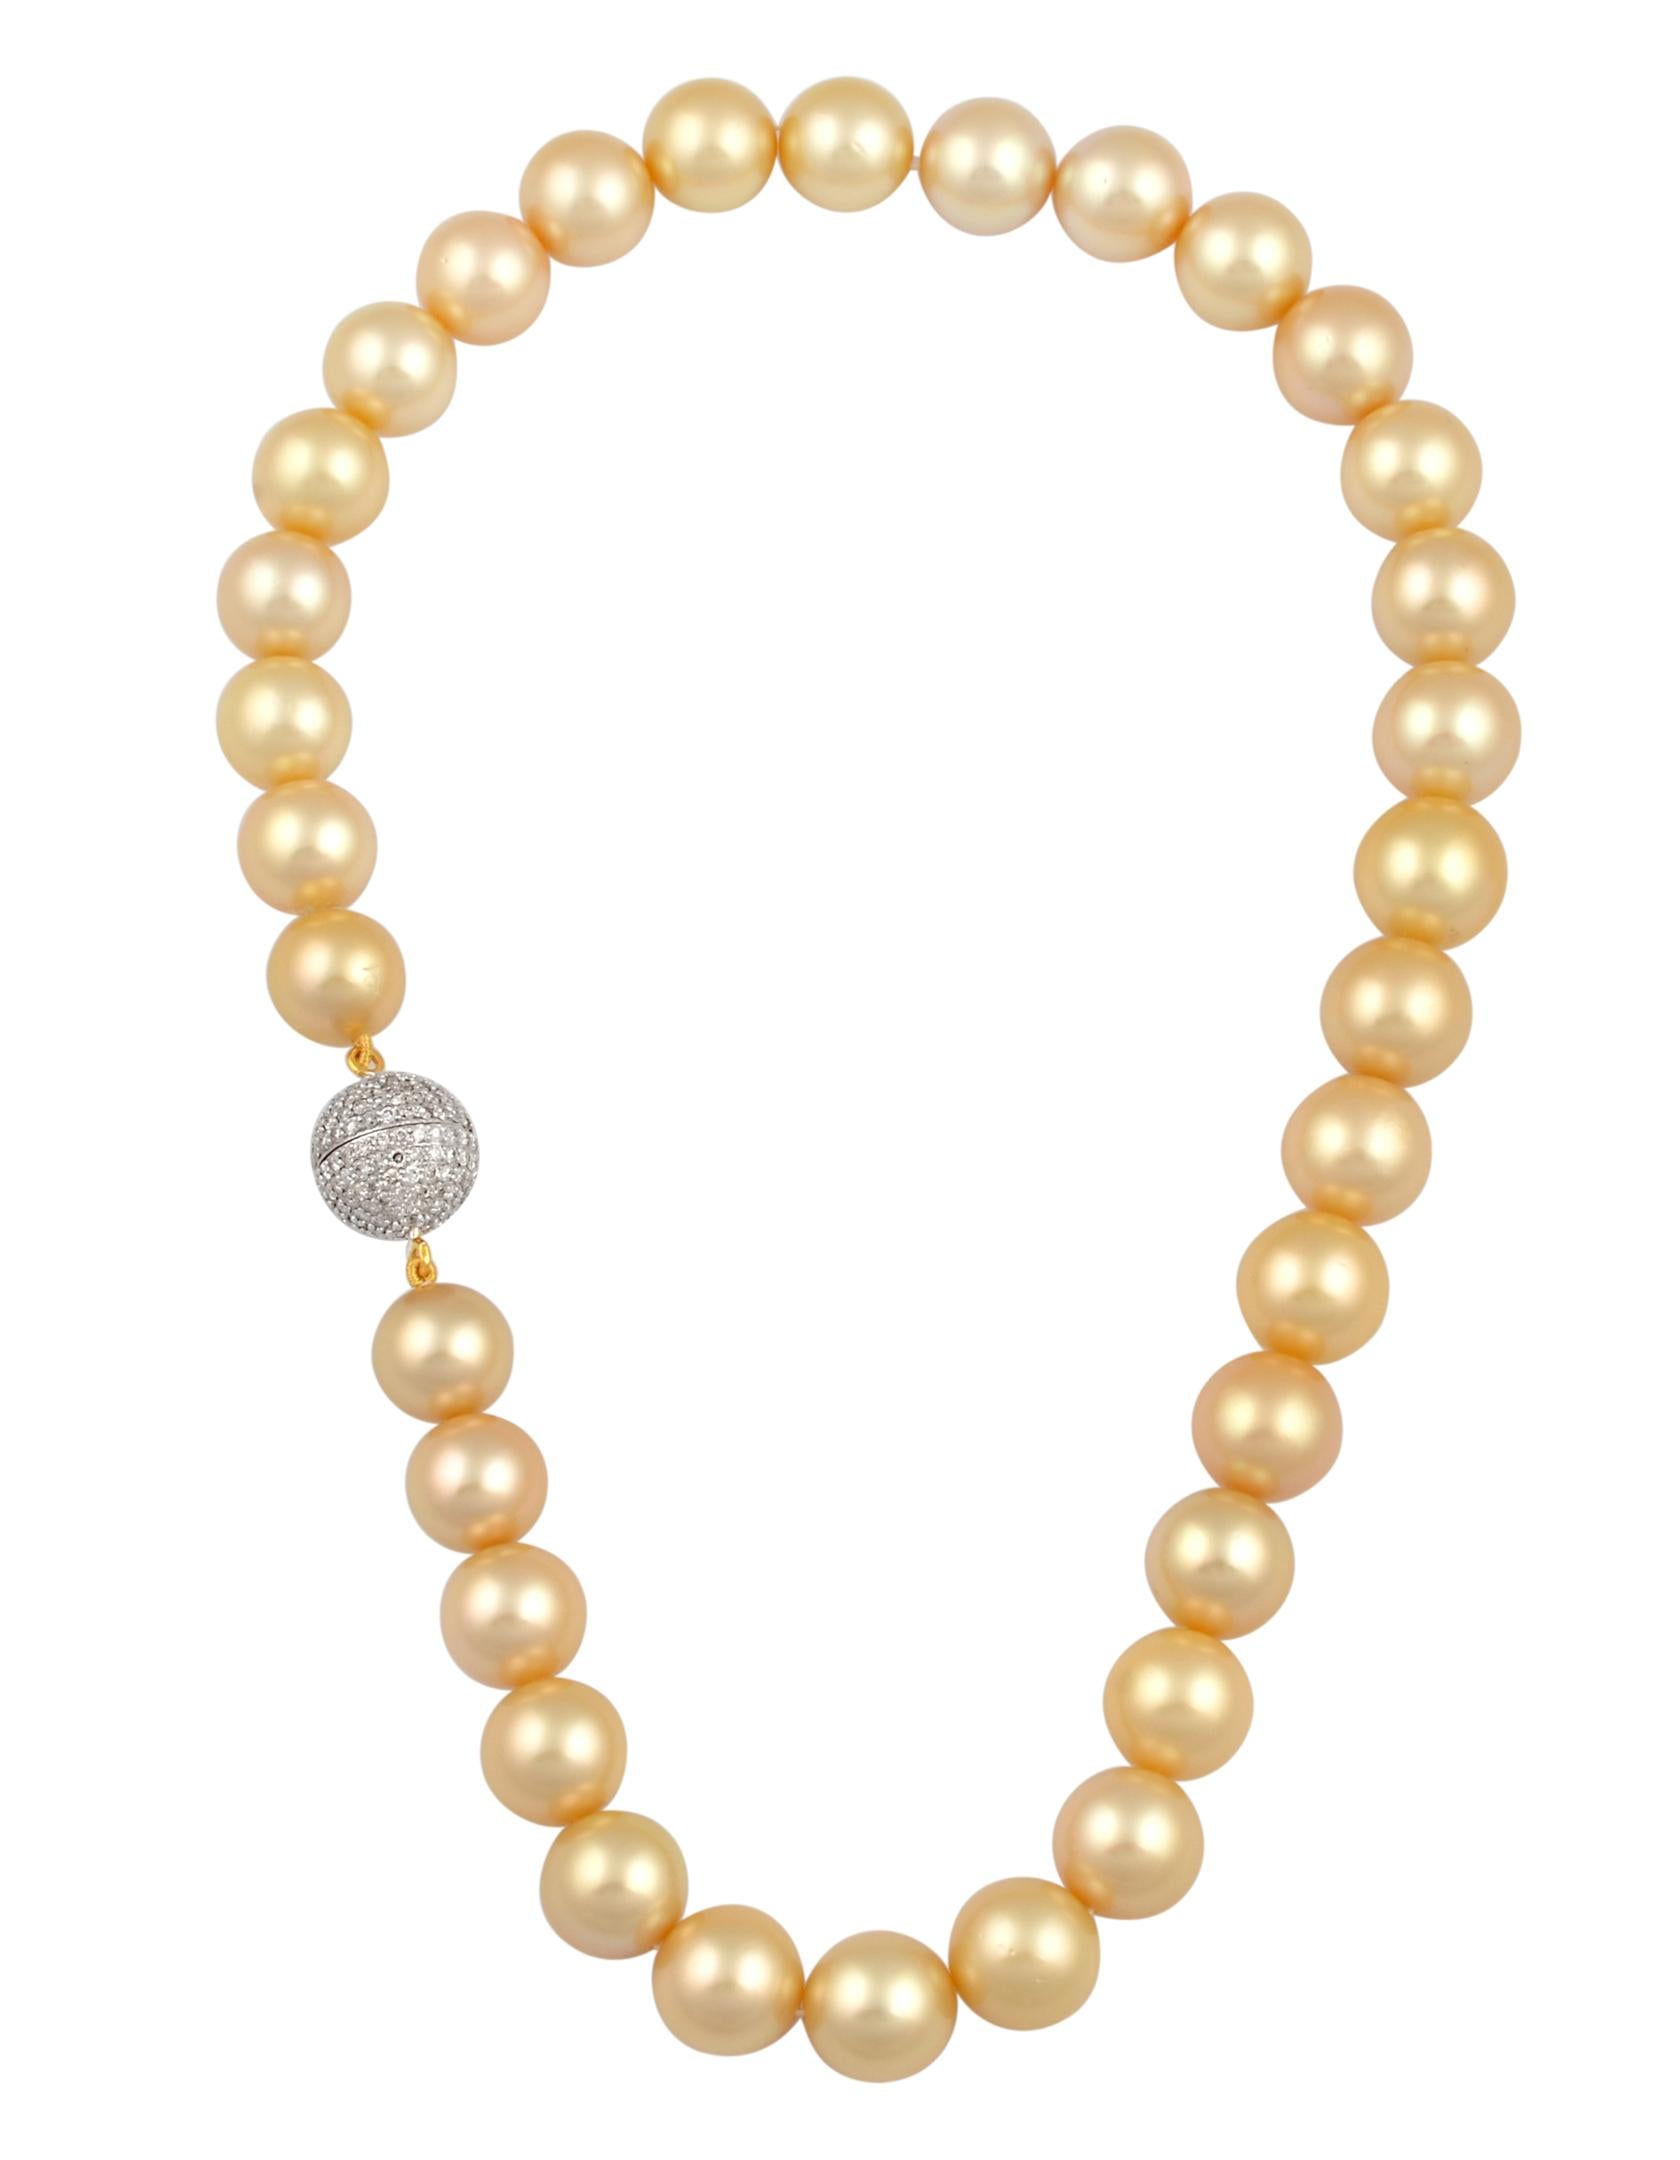 13-15 mm Golden South Sea Pearls  no blemishes ,18  Inches Long Strand Necklace , Estate
Exclusive , Very fine  quality,  you can see any  blemishes on them
The necklace is composed of  33 Golden south Sea Pearls and one 14Karat white gold studded